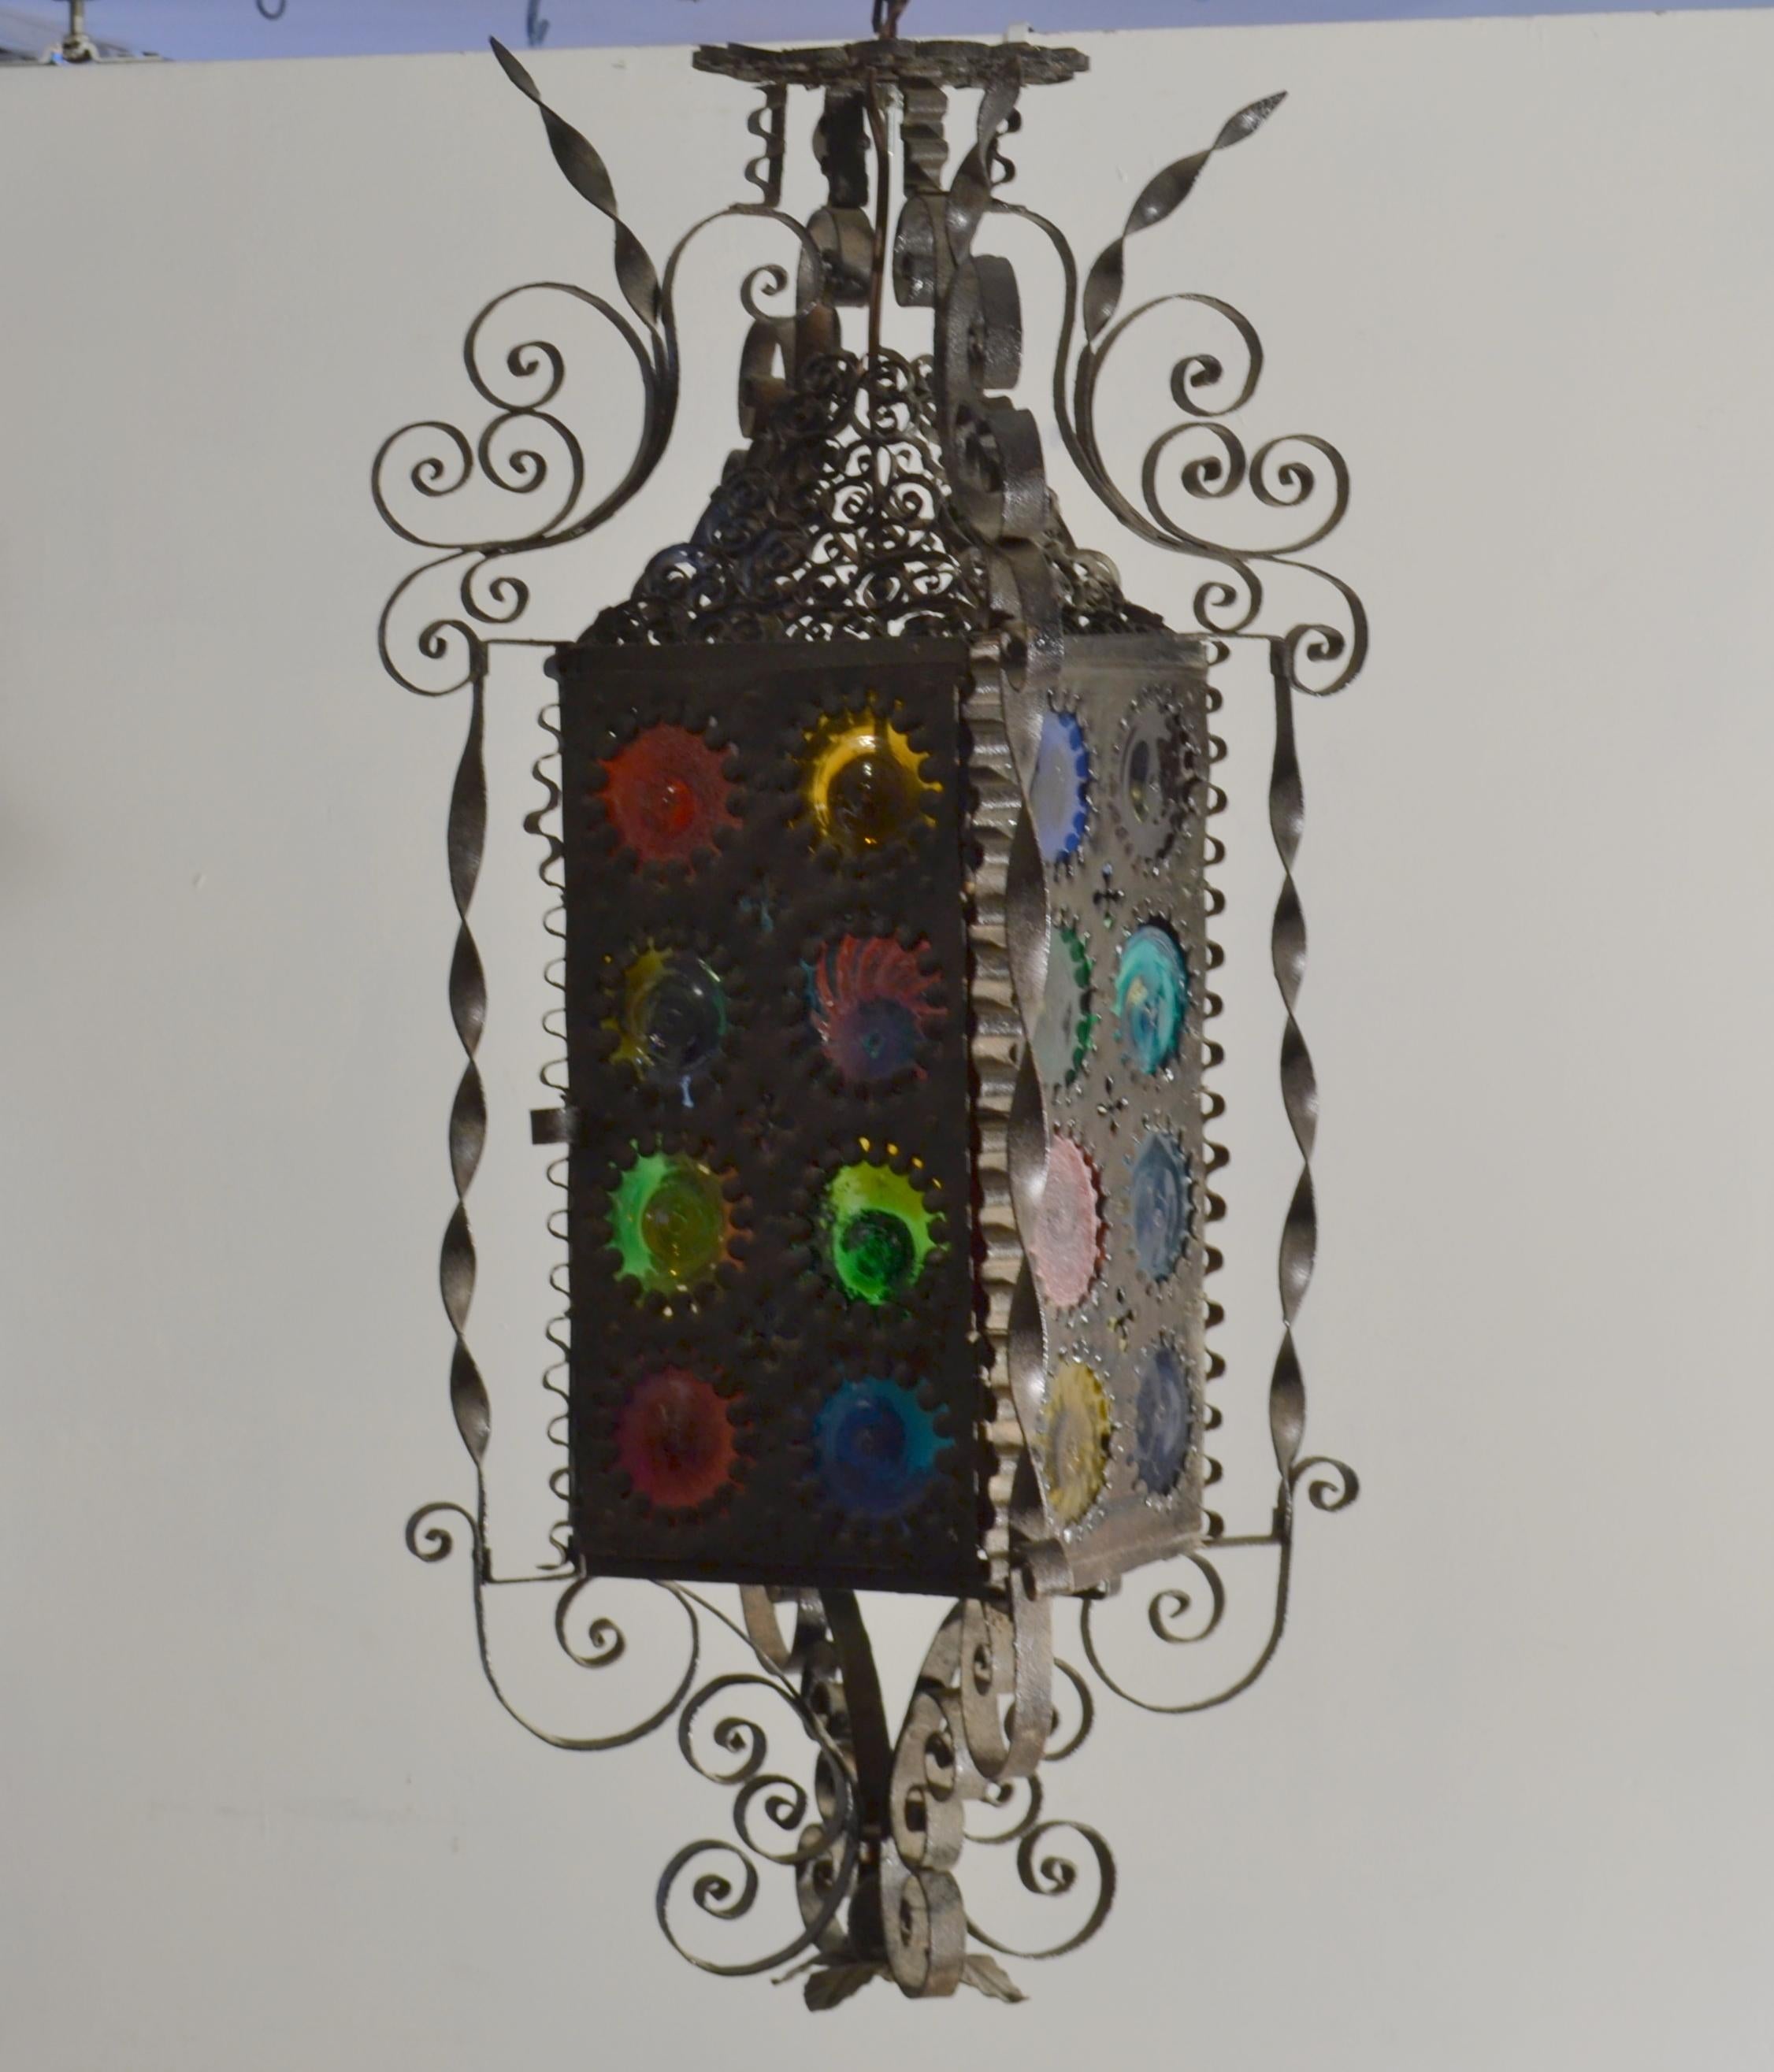 Renaissance 20th Century Venetian Wrought Iron Lantern with Colored Glass Disks